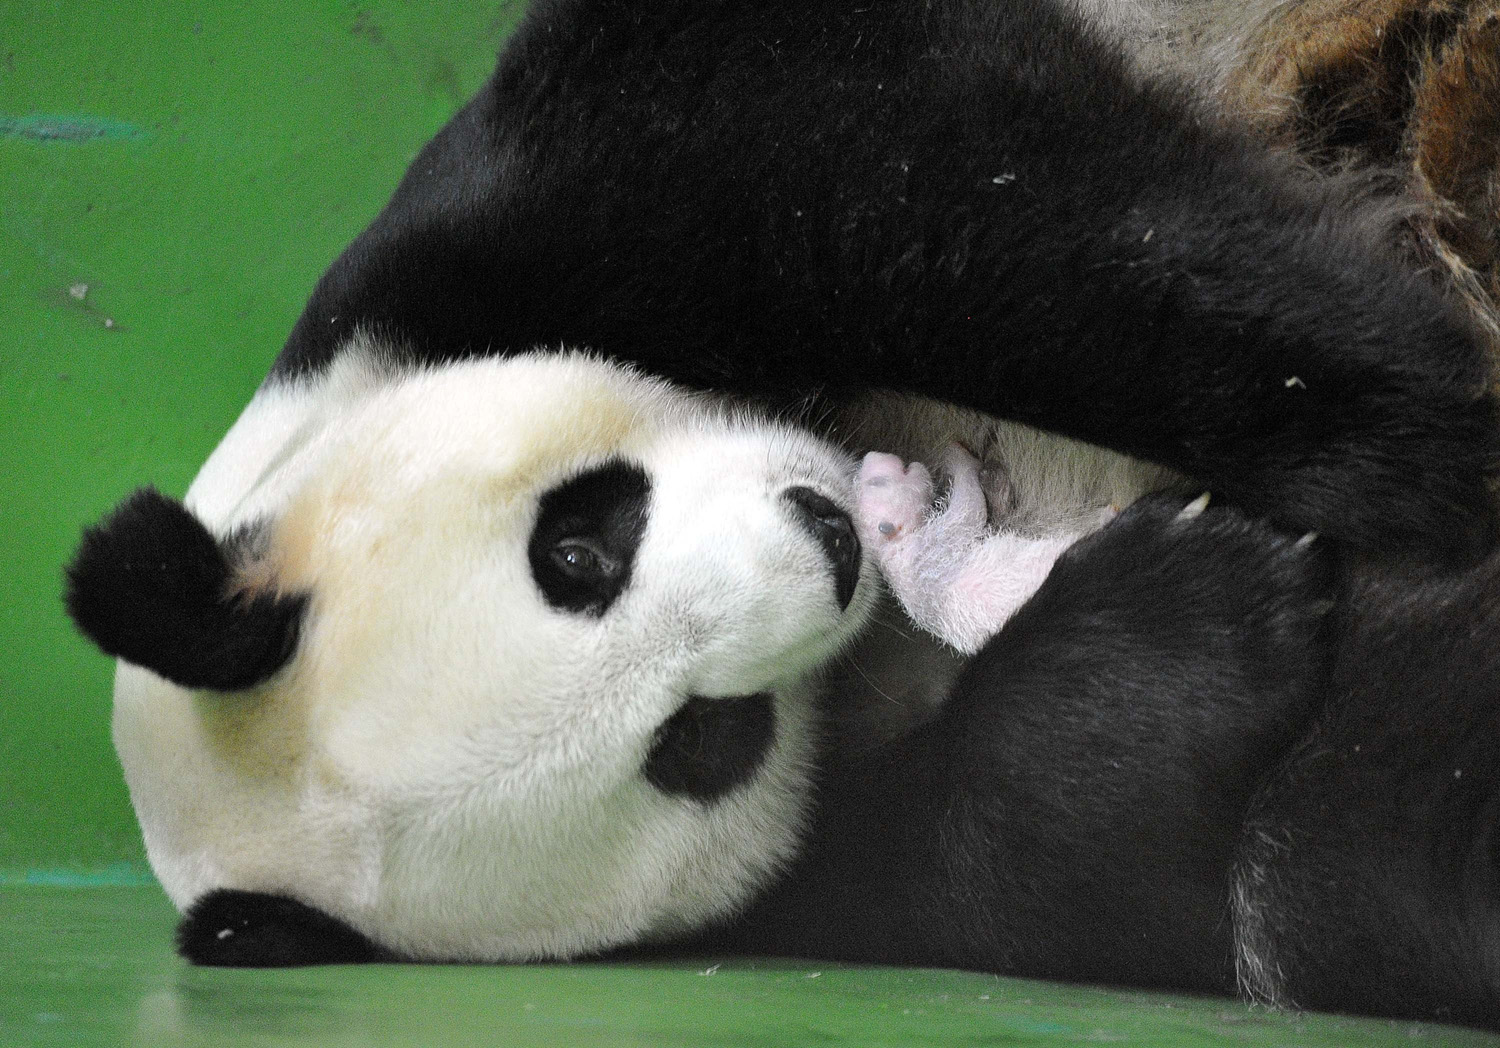 Giant panda "Ju Xiao" gave birth to three panda cubs on July 29, here she holds one of her panda cub's in her arms in Guangzhou, China on August 10, 2014.